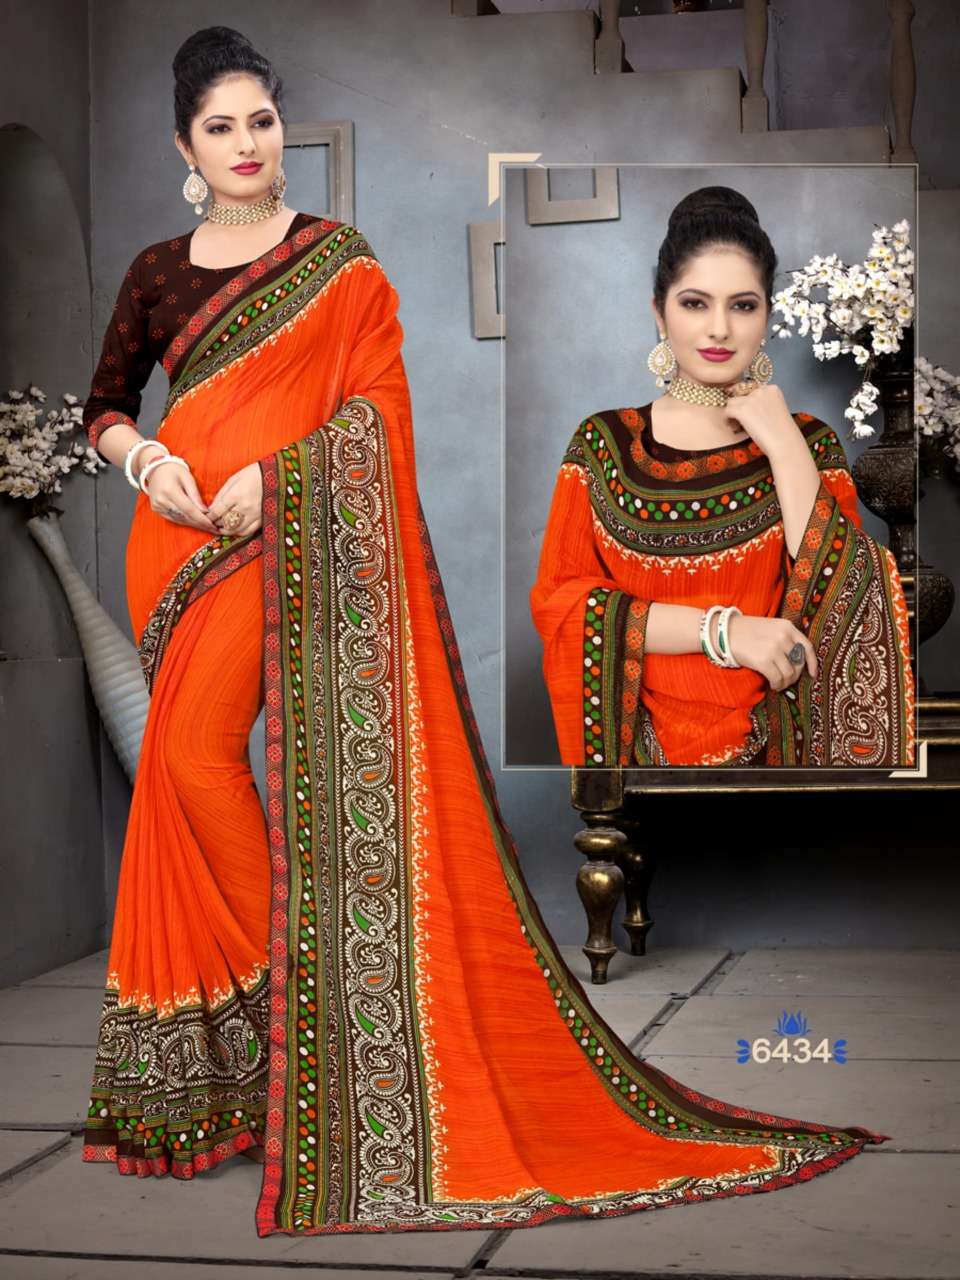 ADVANCE BOOKING VOL-12 BY HAYTEE 6429 TO 6440 SERIES INDIAN TRADITIONAL WEAR COLLECTION BEAUTIFUL STYLISH FANCY COLORFUL PARTY WEAR & OCCASIONAL WEAR HEAVY DANI PRINTED SAREES AT WHOLESALE PRICE